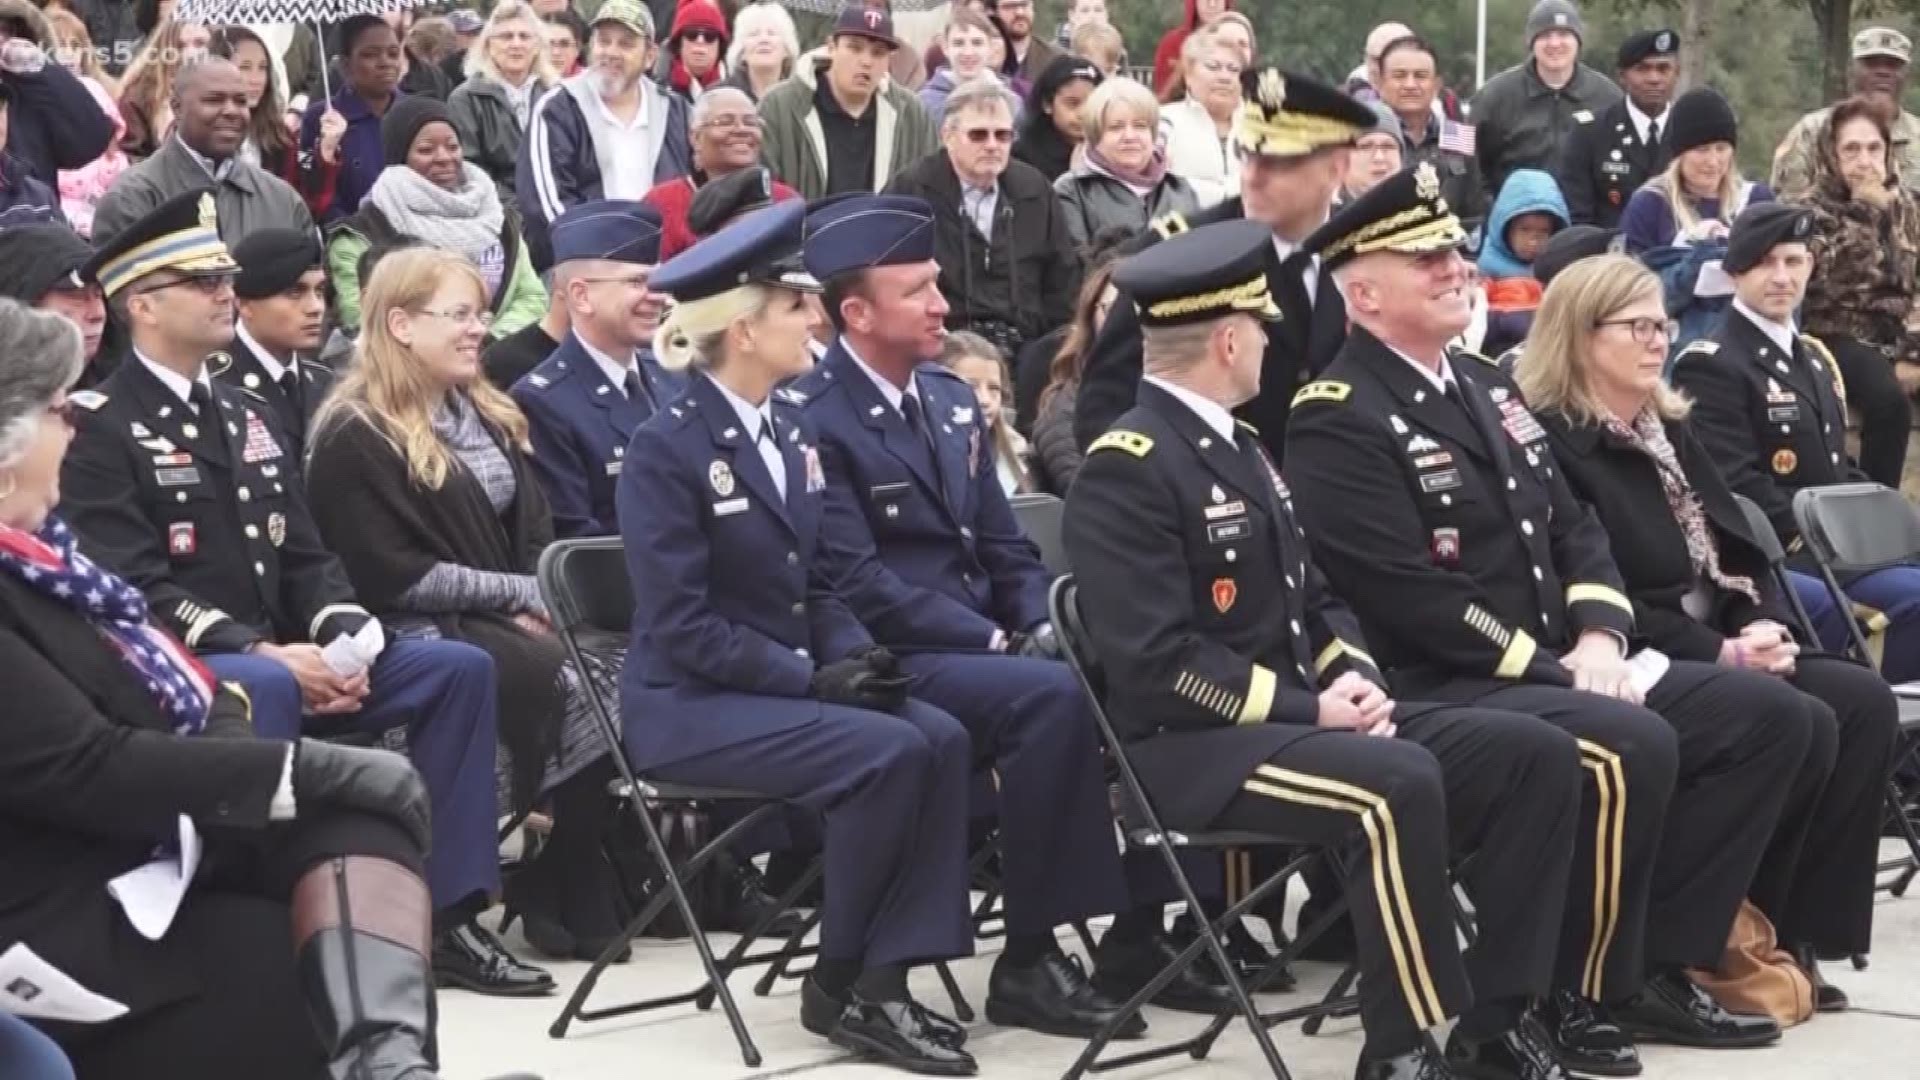 Eyewitness News reporter Jeremy Baker attended a special ceremony in Military City, USA.